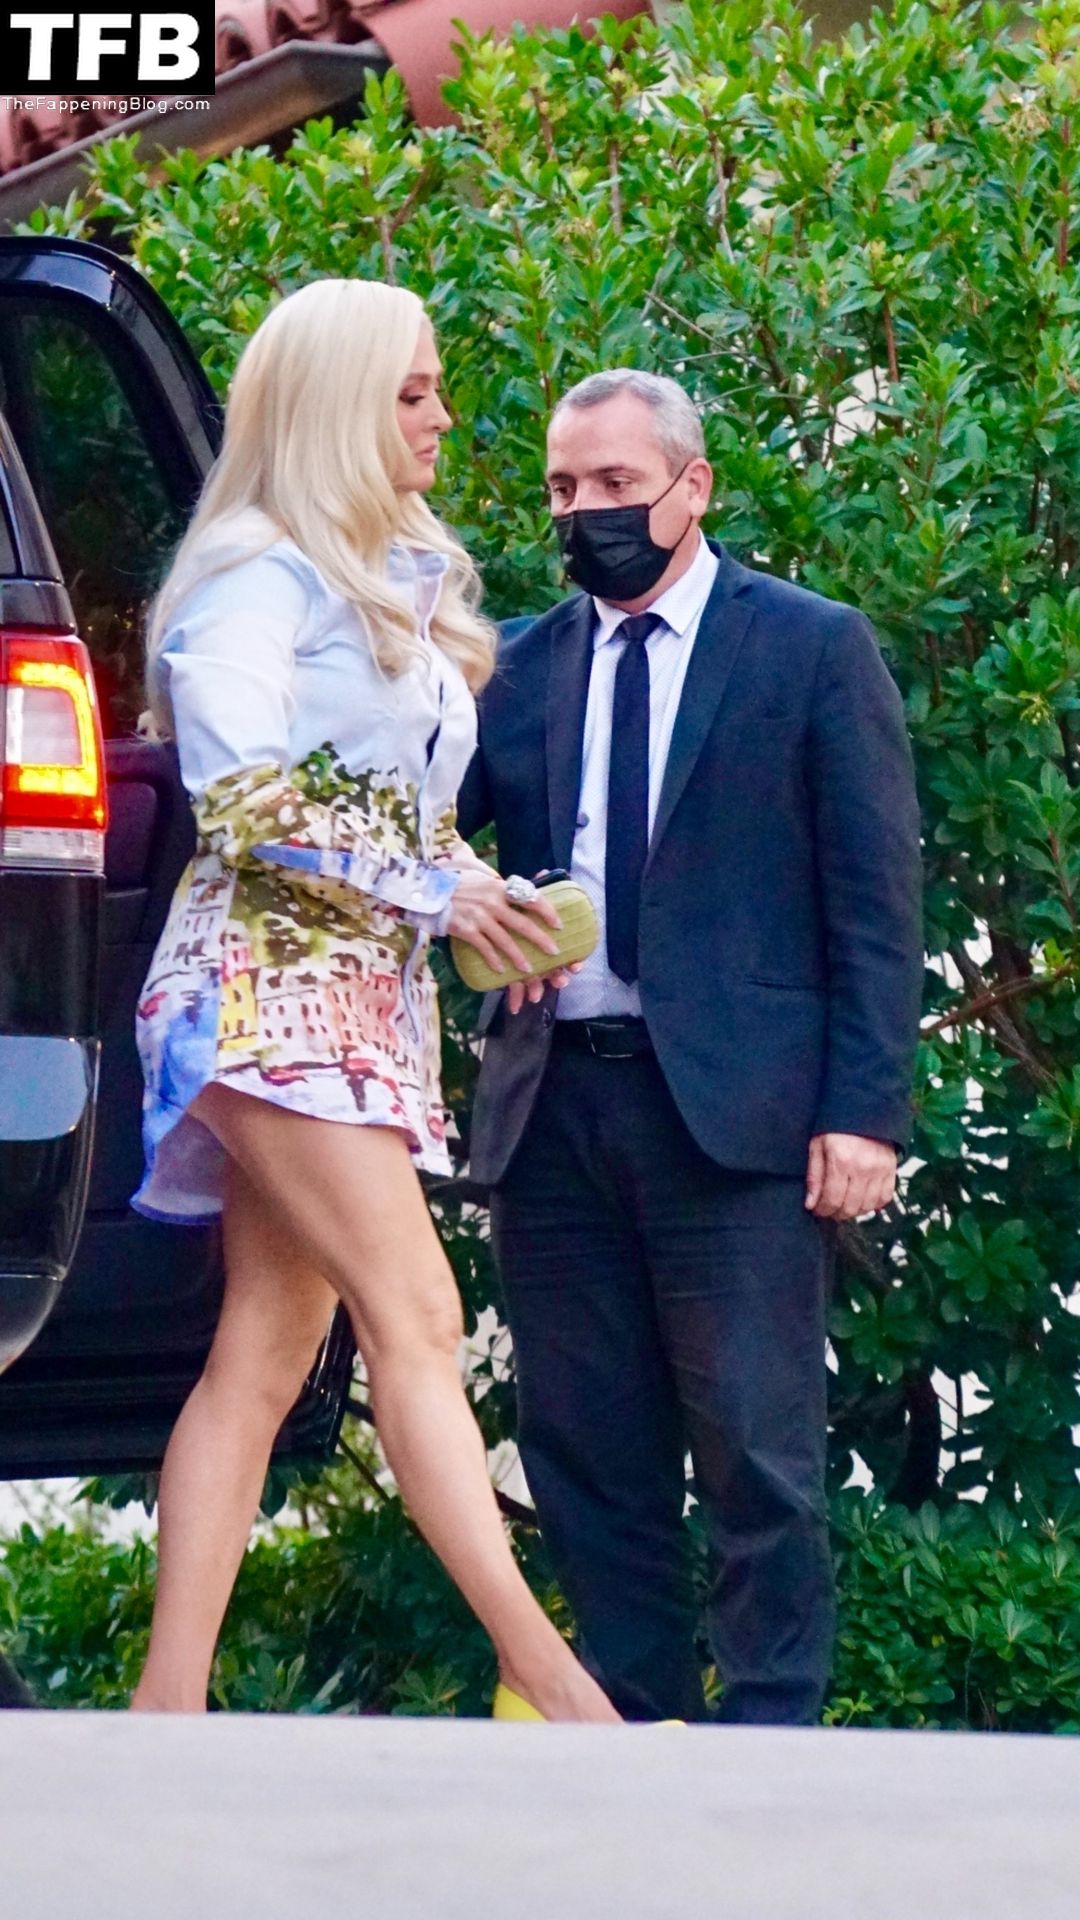 Erika Jayne Shows Off Her Toned Legs as She Arrives to Film RHOBH (13 Photos)